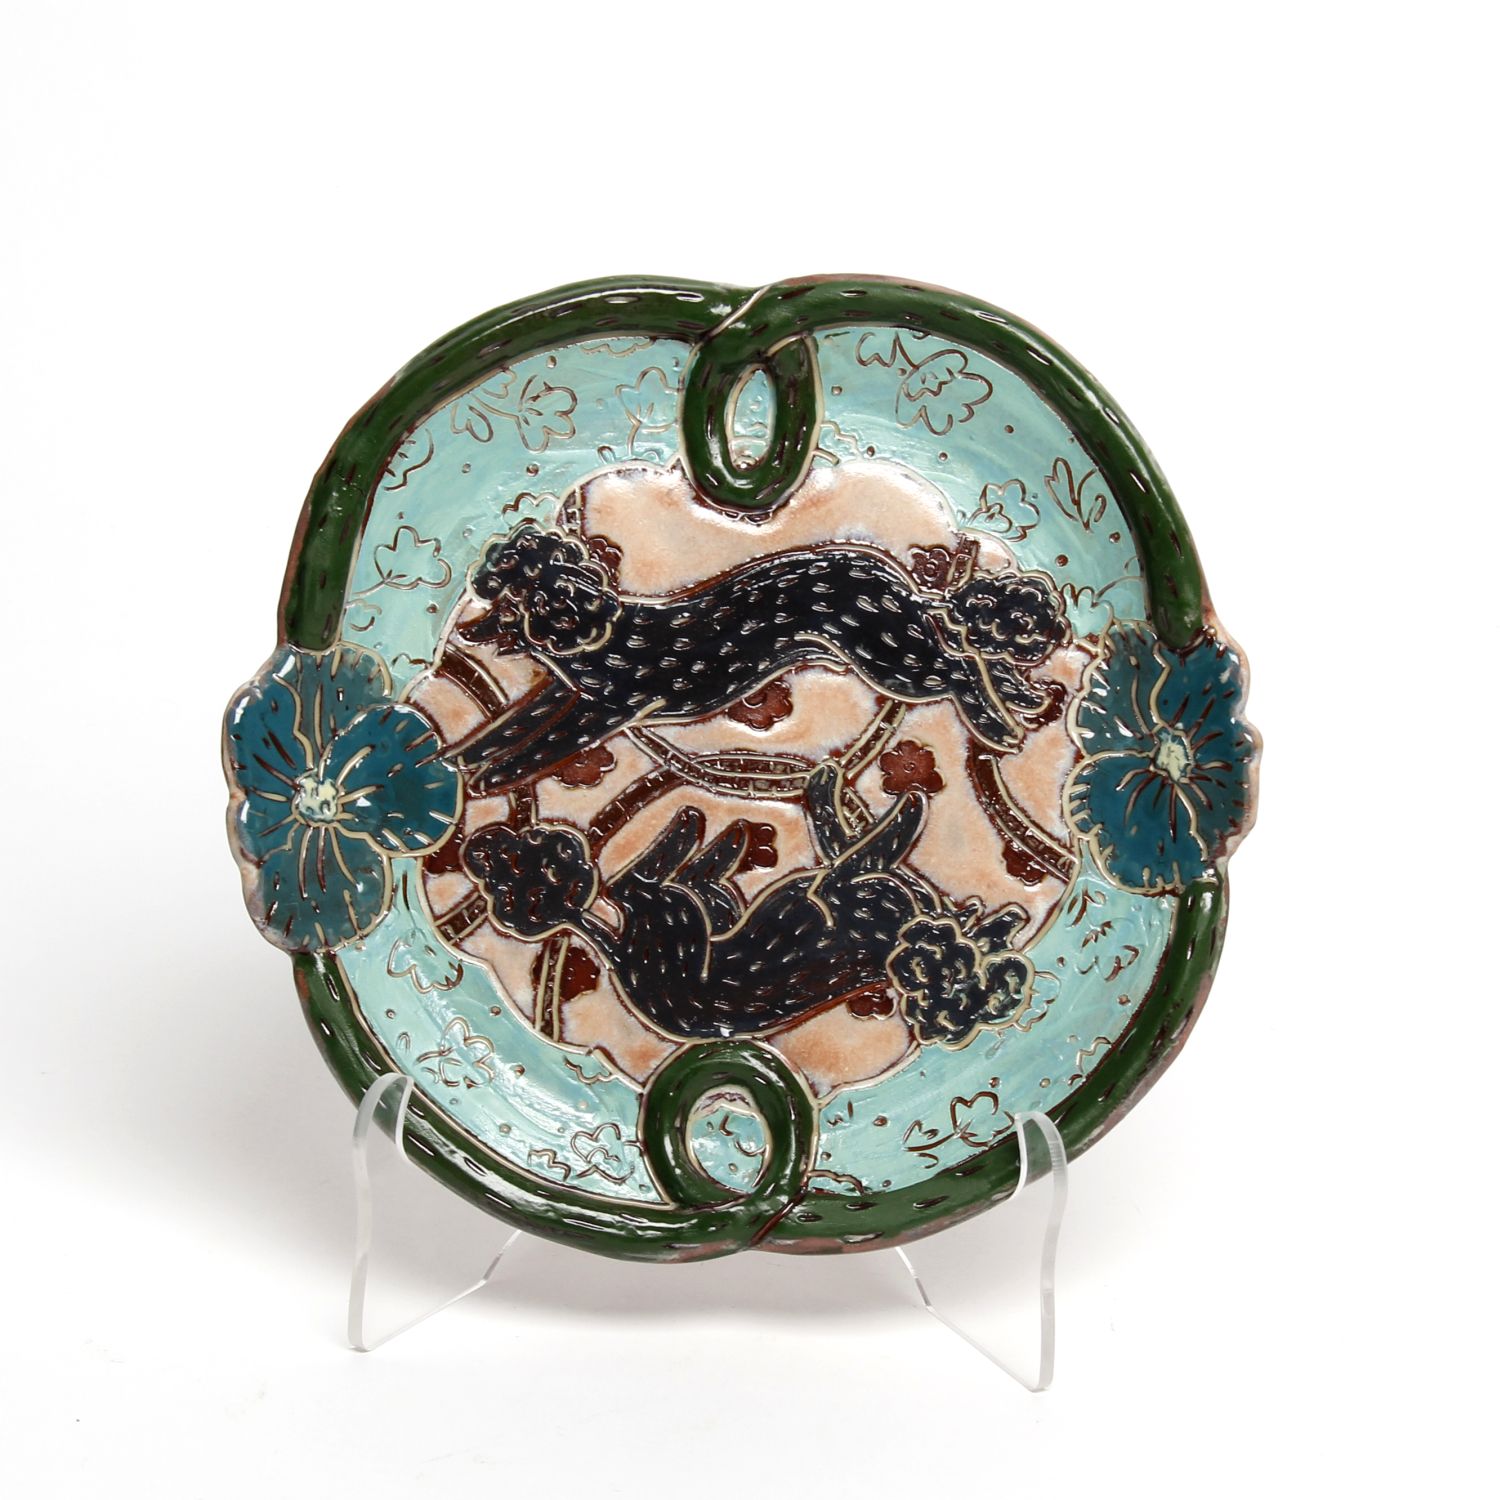 Zoe Pinnell: Poodle Plate Product Image 1 of 3